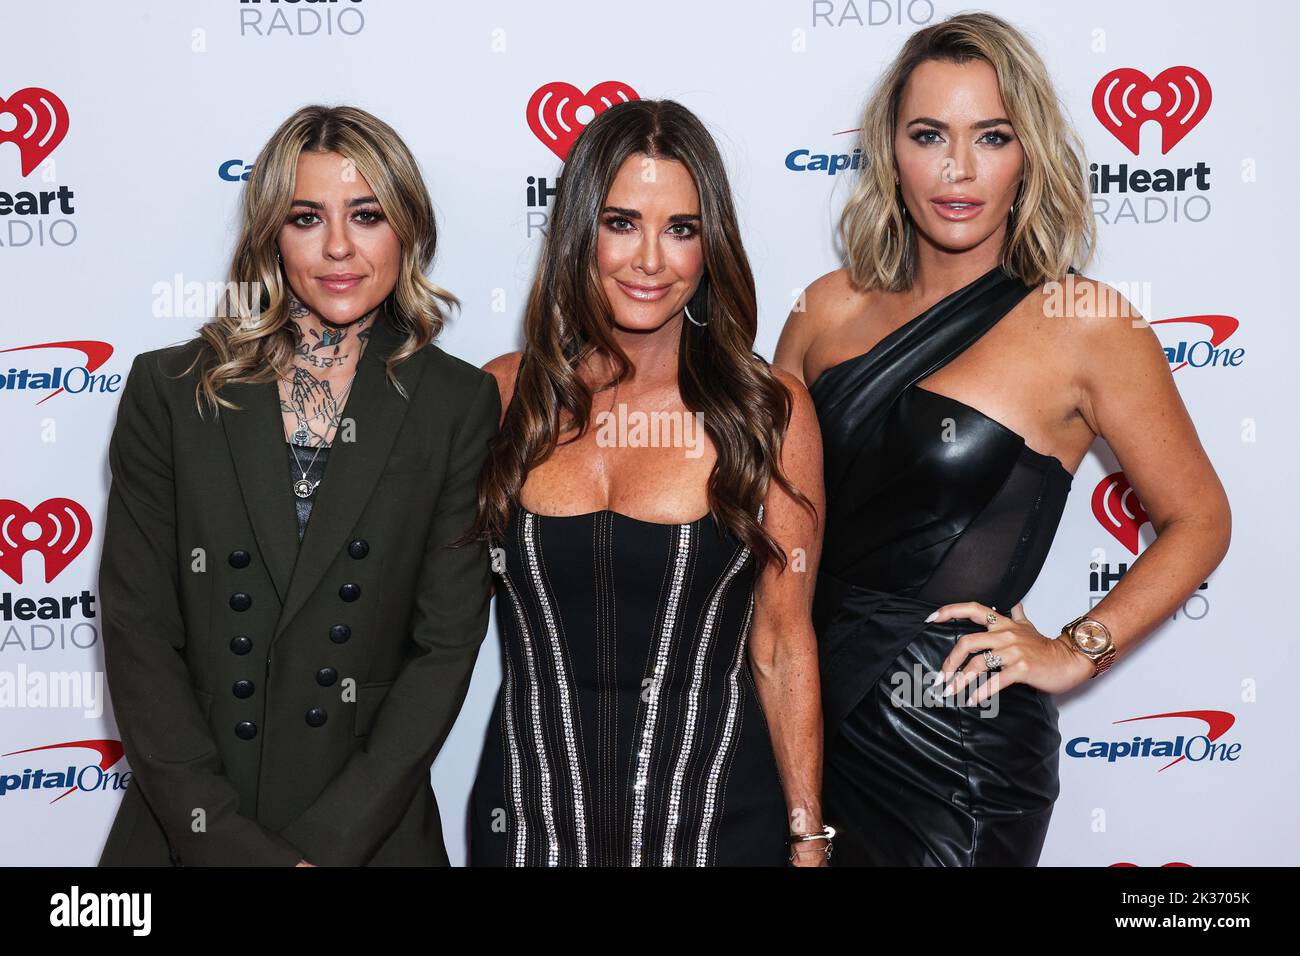 LAS VEGAS, NEVADA, USA - SEPTEMBER 24: Morgan Wade, Kyle Richards and Teddi Jo Mellencamp Arroyave pose in the press room at the 2022 iHeartRadio Music Festival - Night 2 held at the T-Mobile Arena on September 24, 2022 in Las Vegas, Nevada, United States. (Photo by Xavier Collin/Image Press Agency) Stock Photo